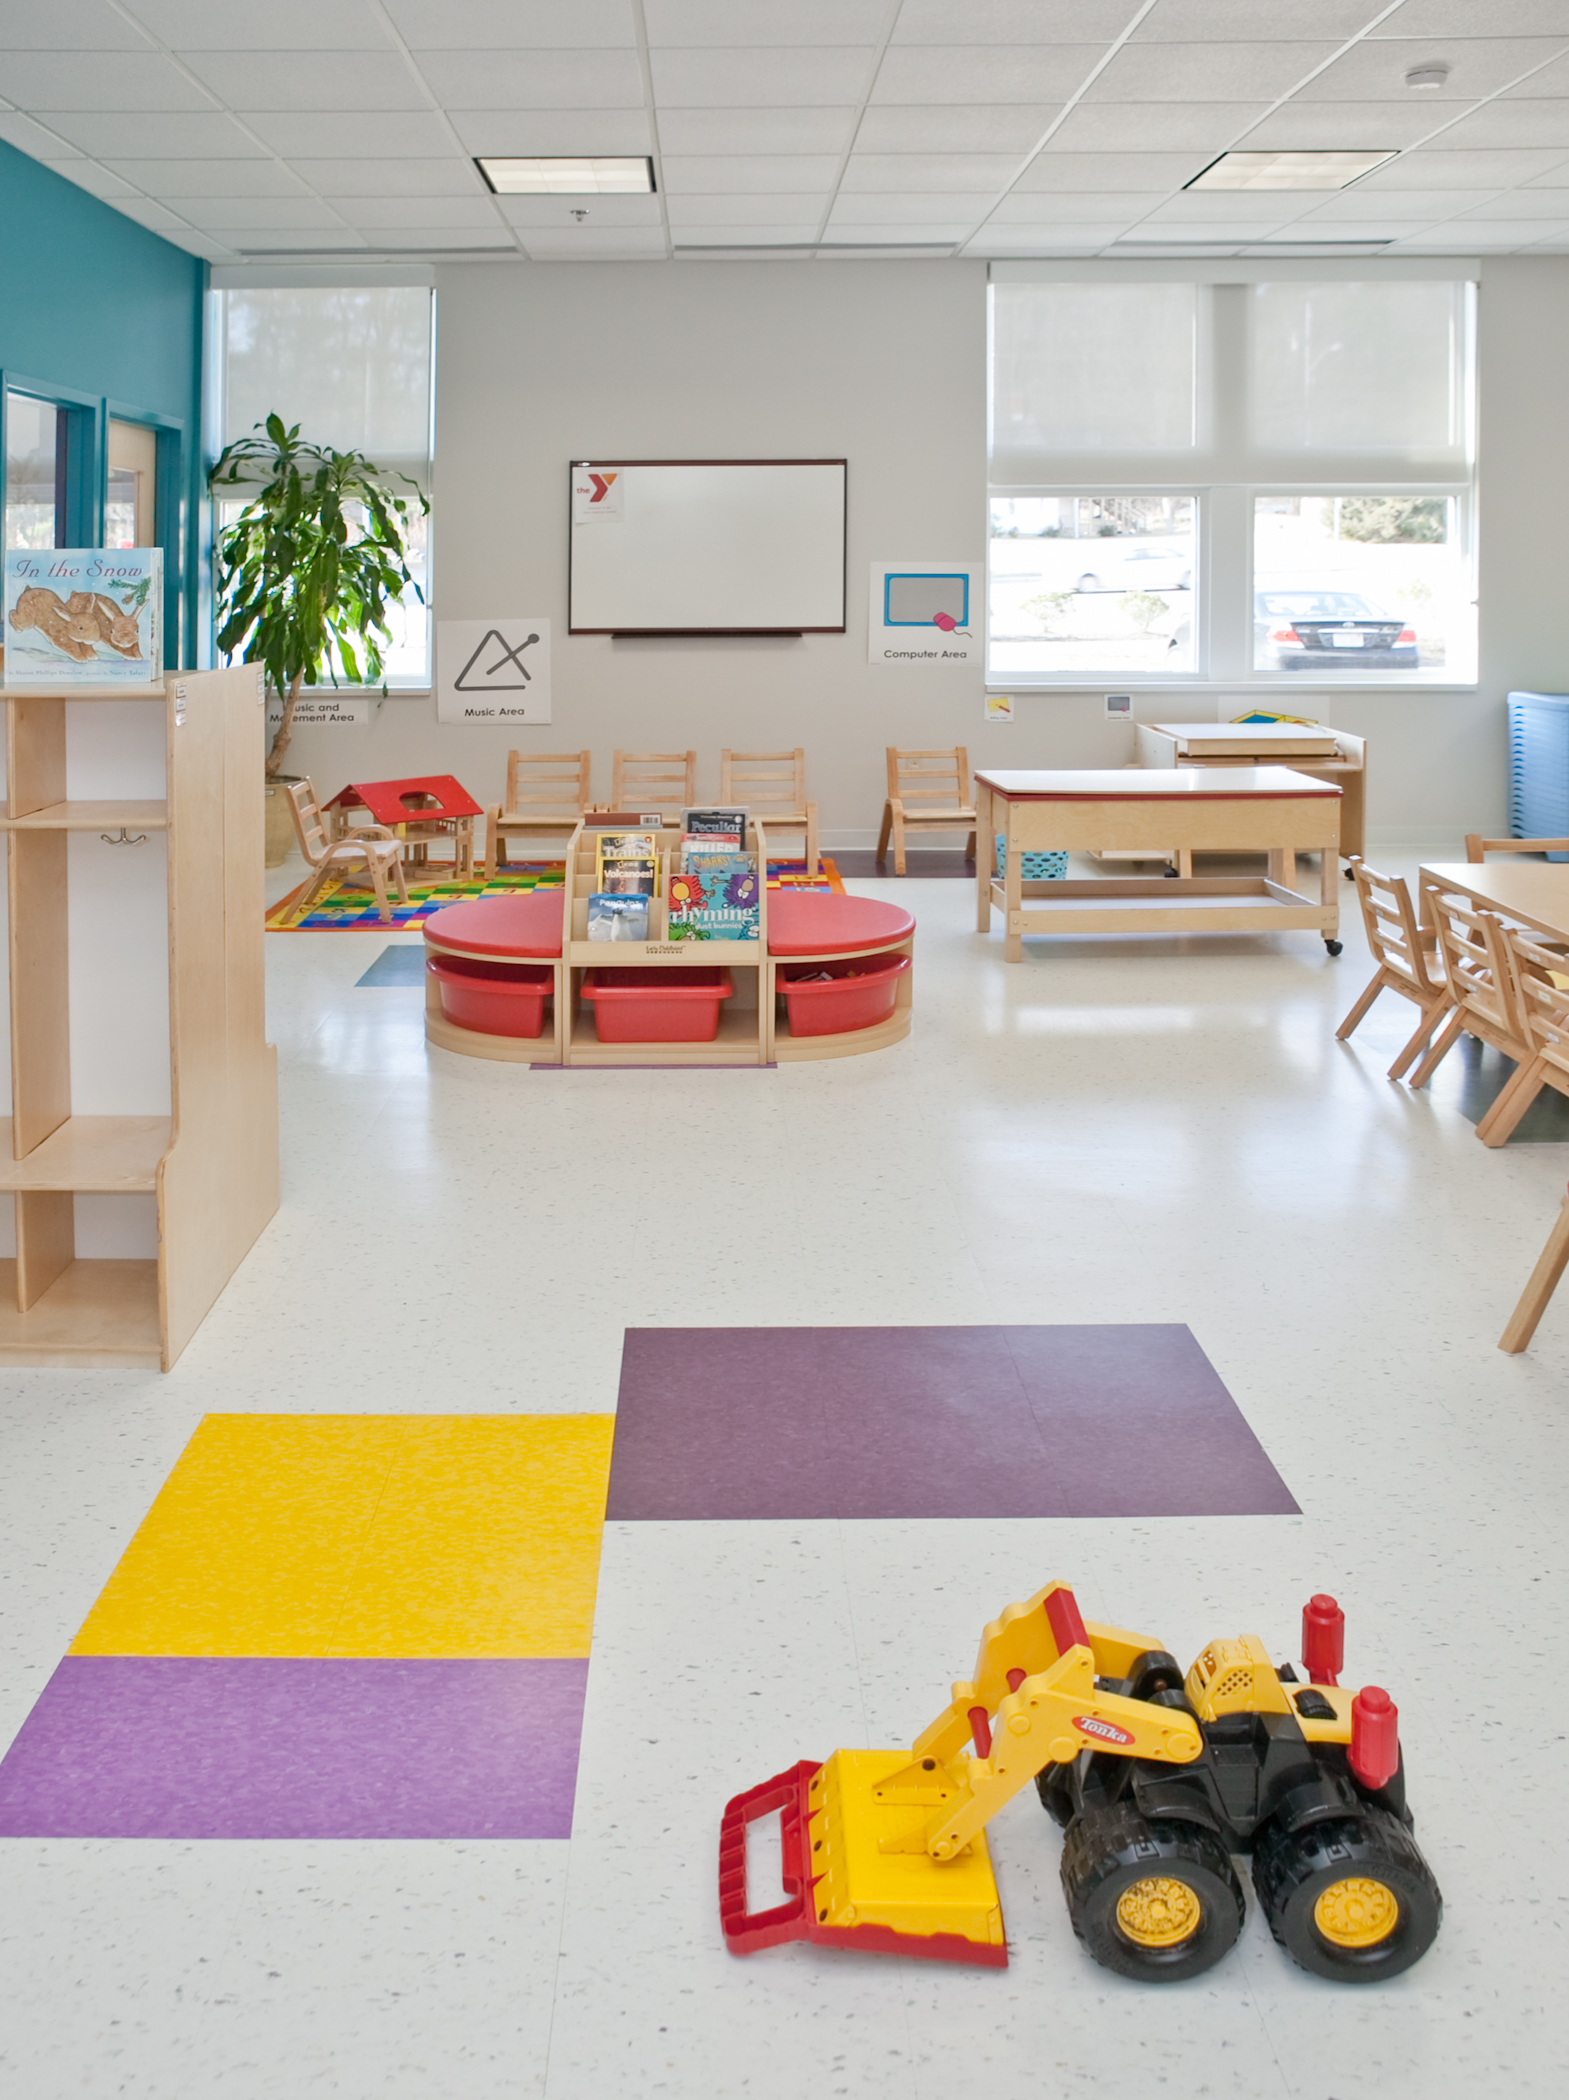 YMCA - EARLY LEARNING CENTER